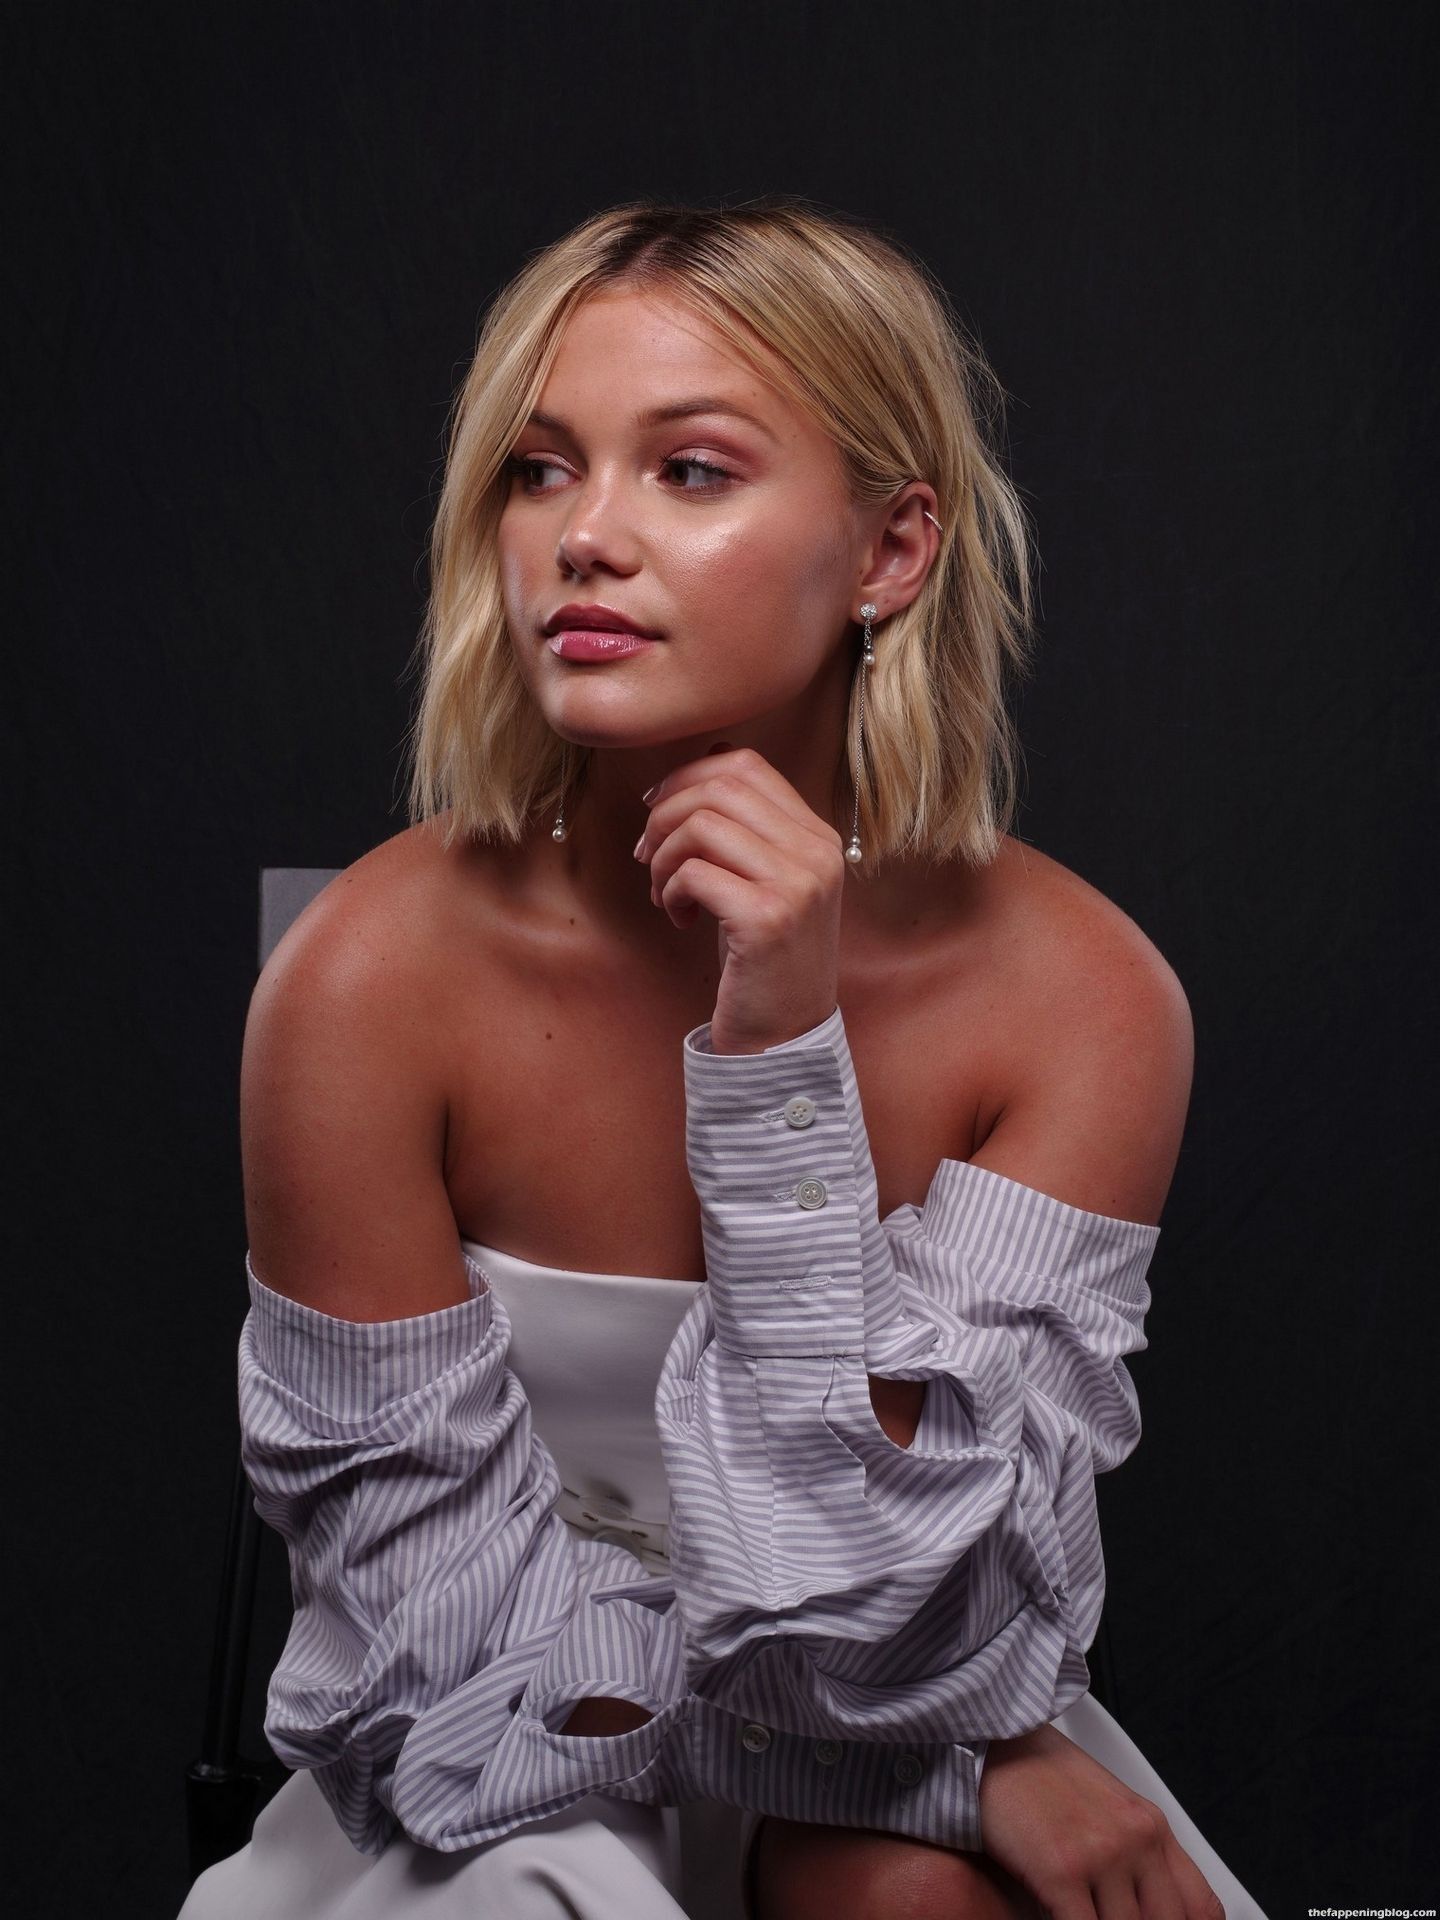 sexiest-photos-of-olivia-holt-that-you-never-seen-before-2-thefappeningblog.com1_.jpg